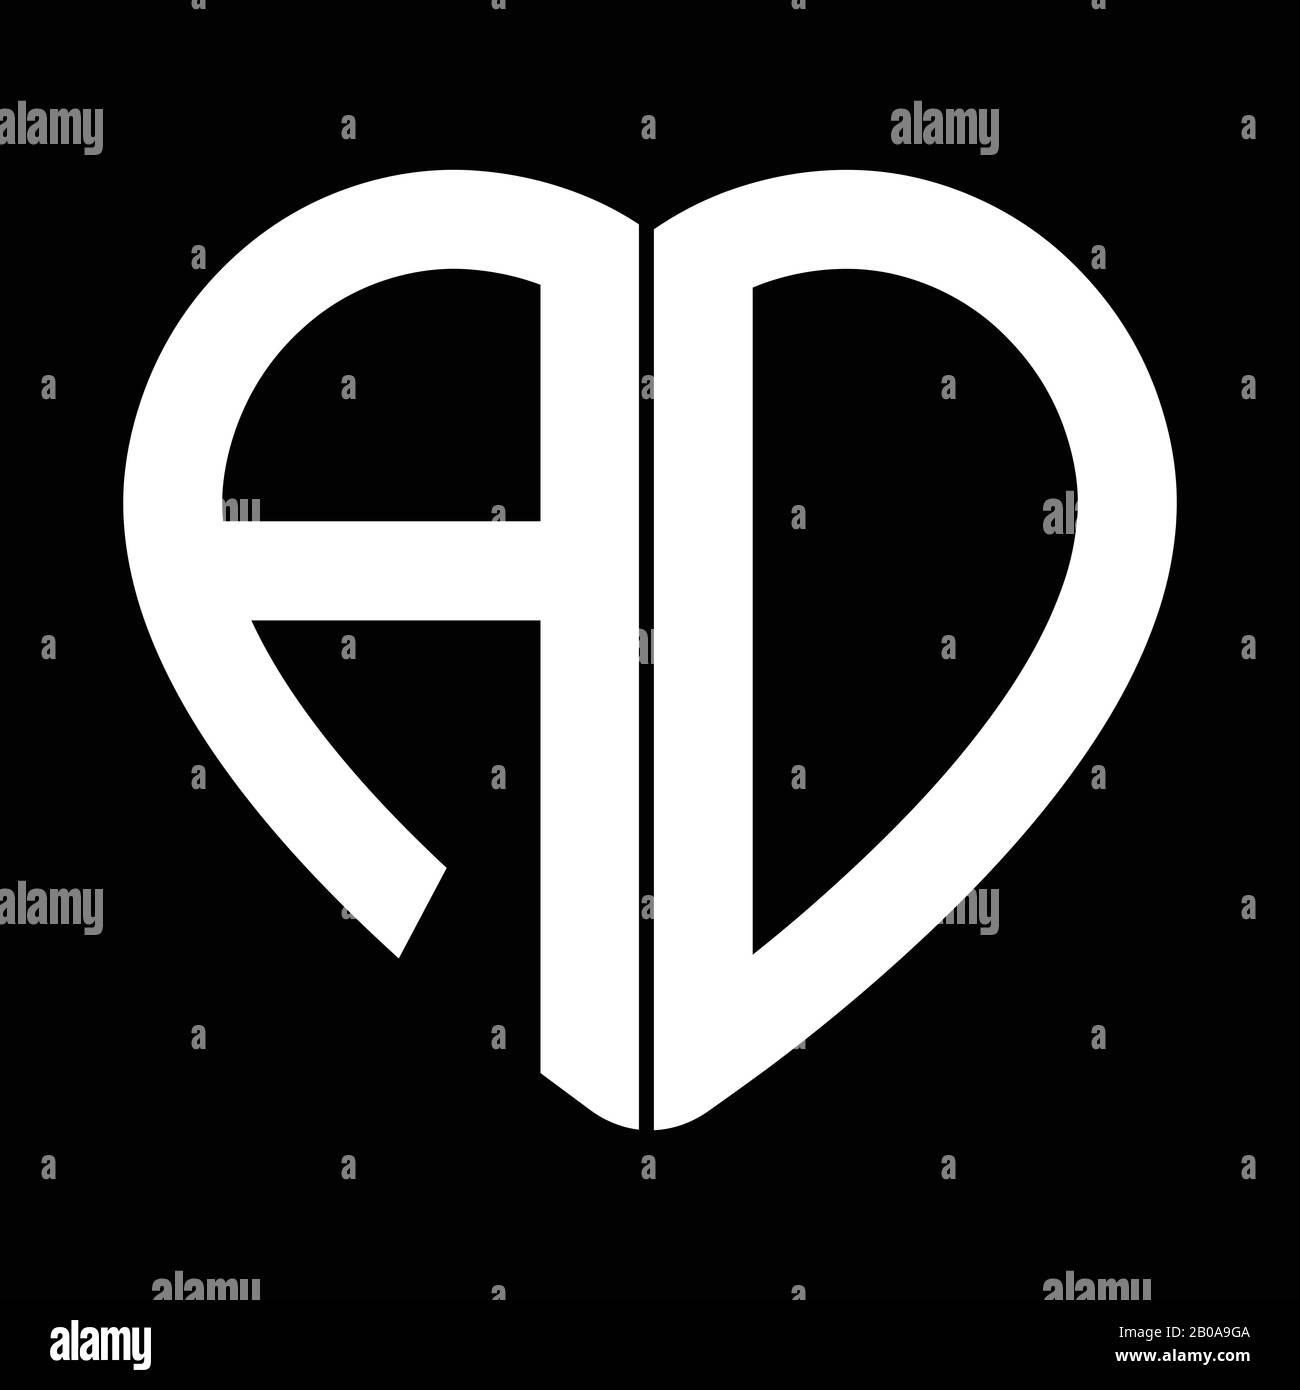 Heart shape monogram logo with letter A and letter D Stock Vector ...